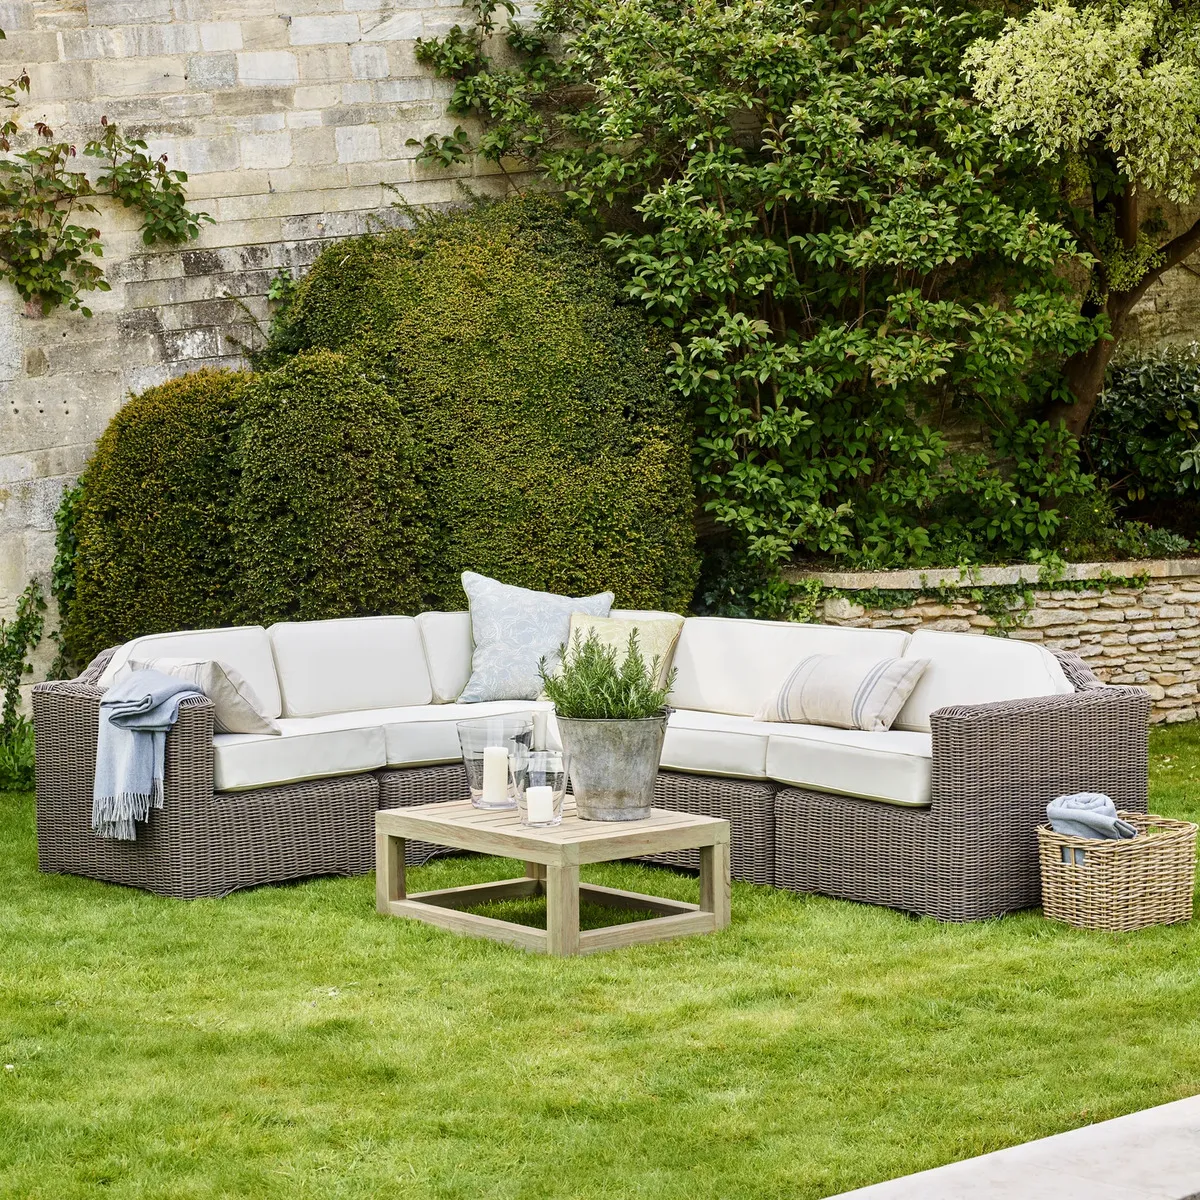 Large corner sofa in a garden with white cushions and throw pillows plus a coffee table with a plant